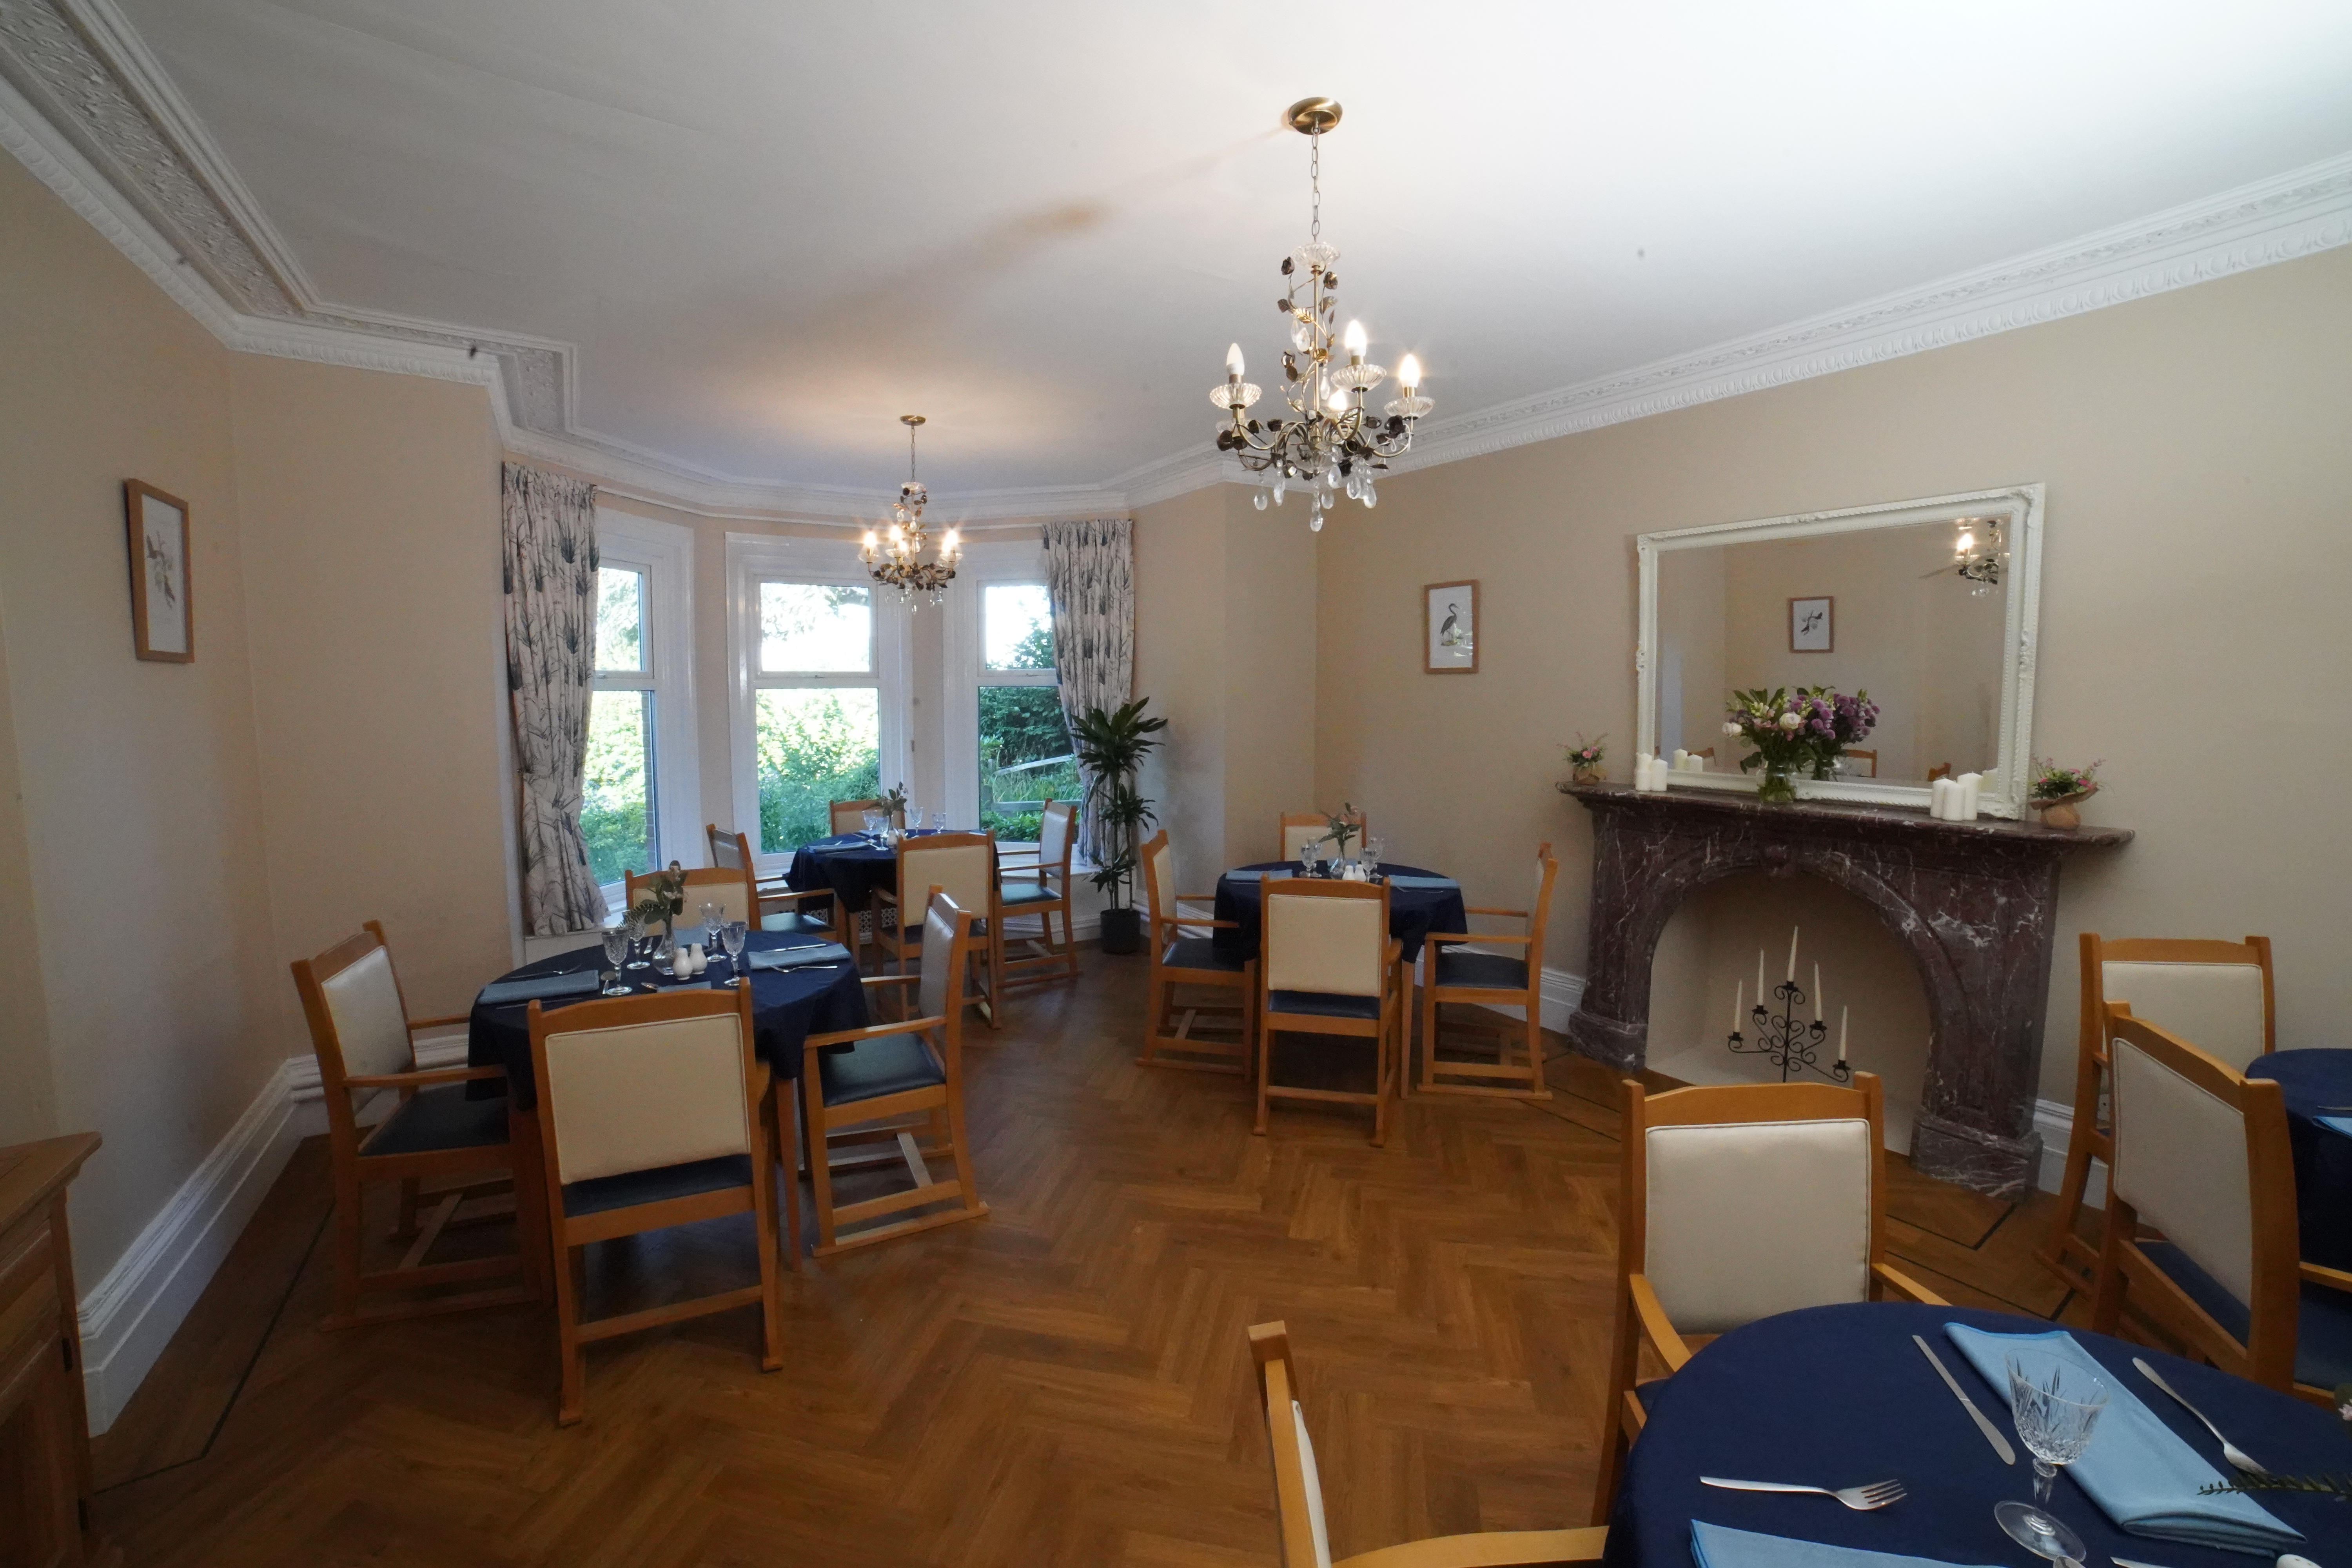 The dining room at Birchwood House